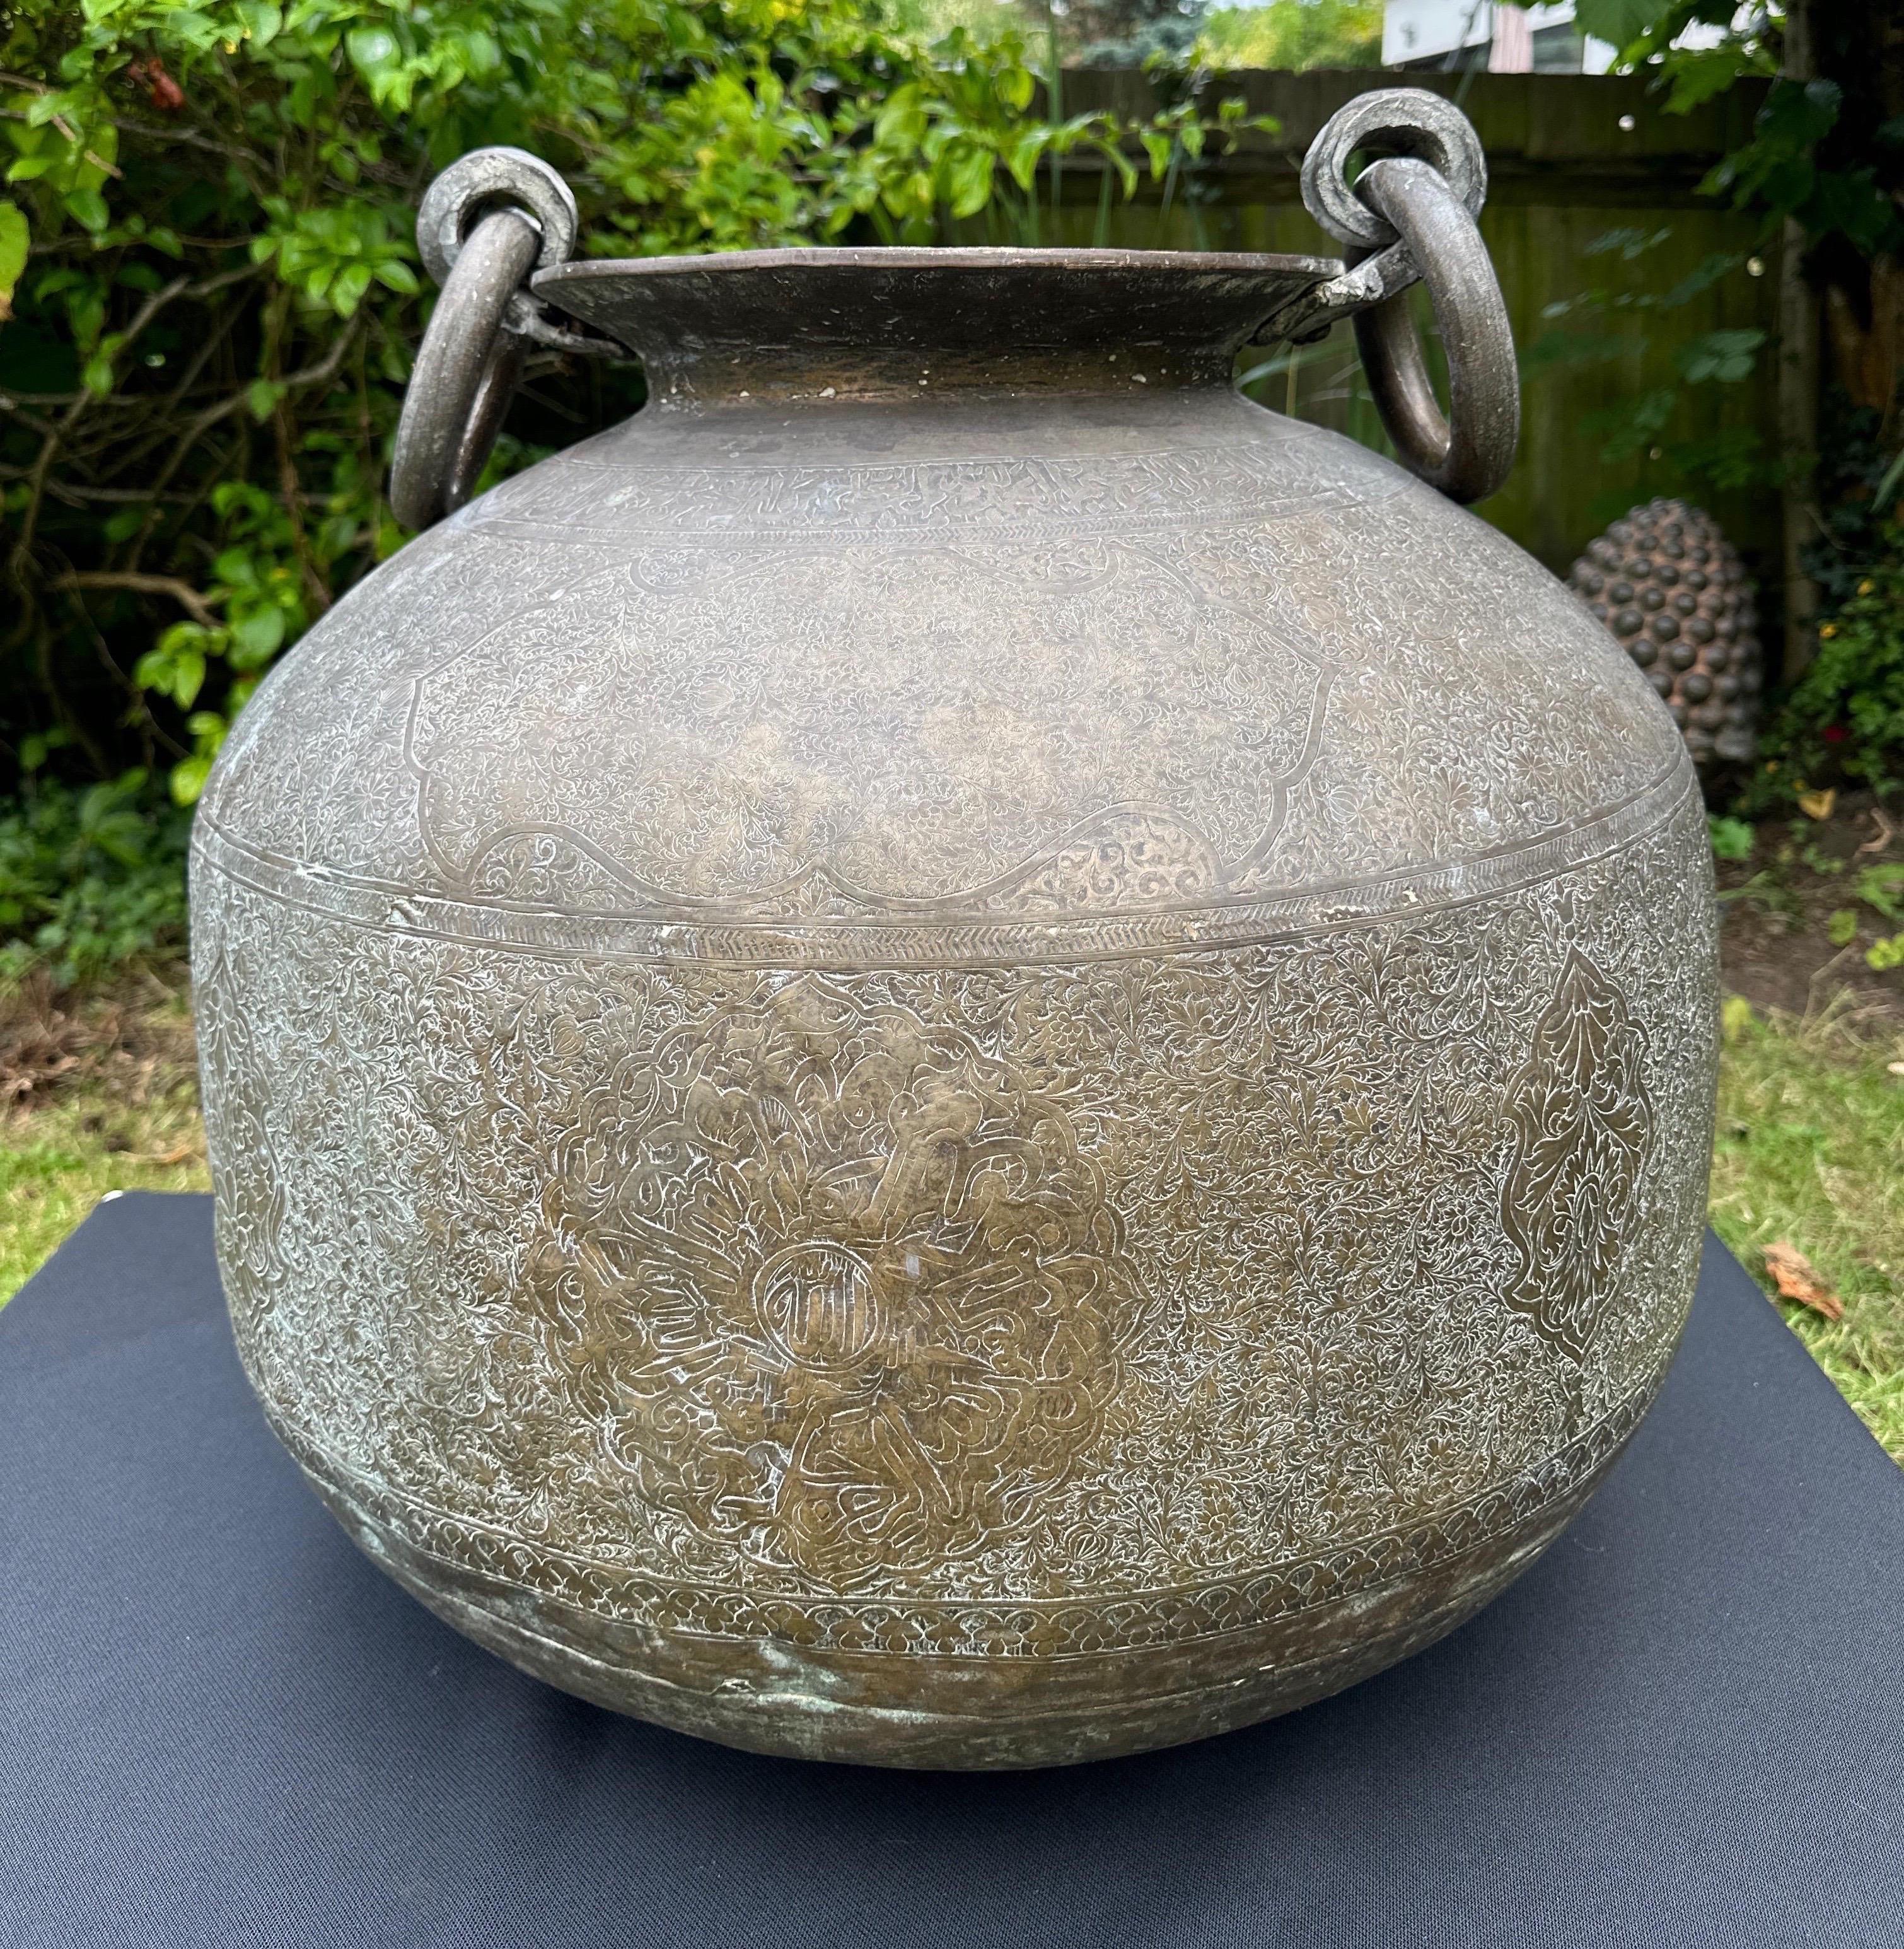 A wonderful Cyrian bronze urn, handmade in the Middle East with engravings around the whole of the urn. With beautiful circular solid bronze handles. Some age related dents . 
Possibly used for carrying water.